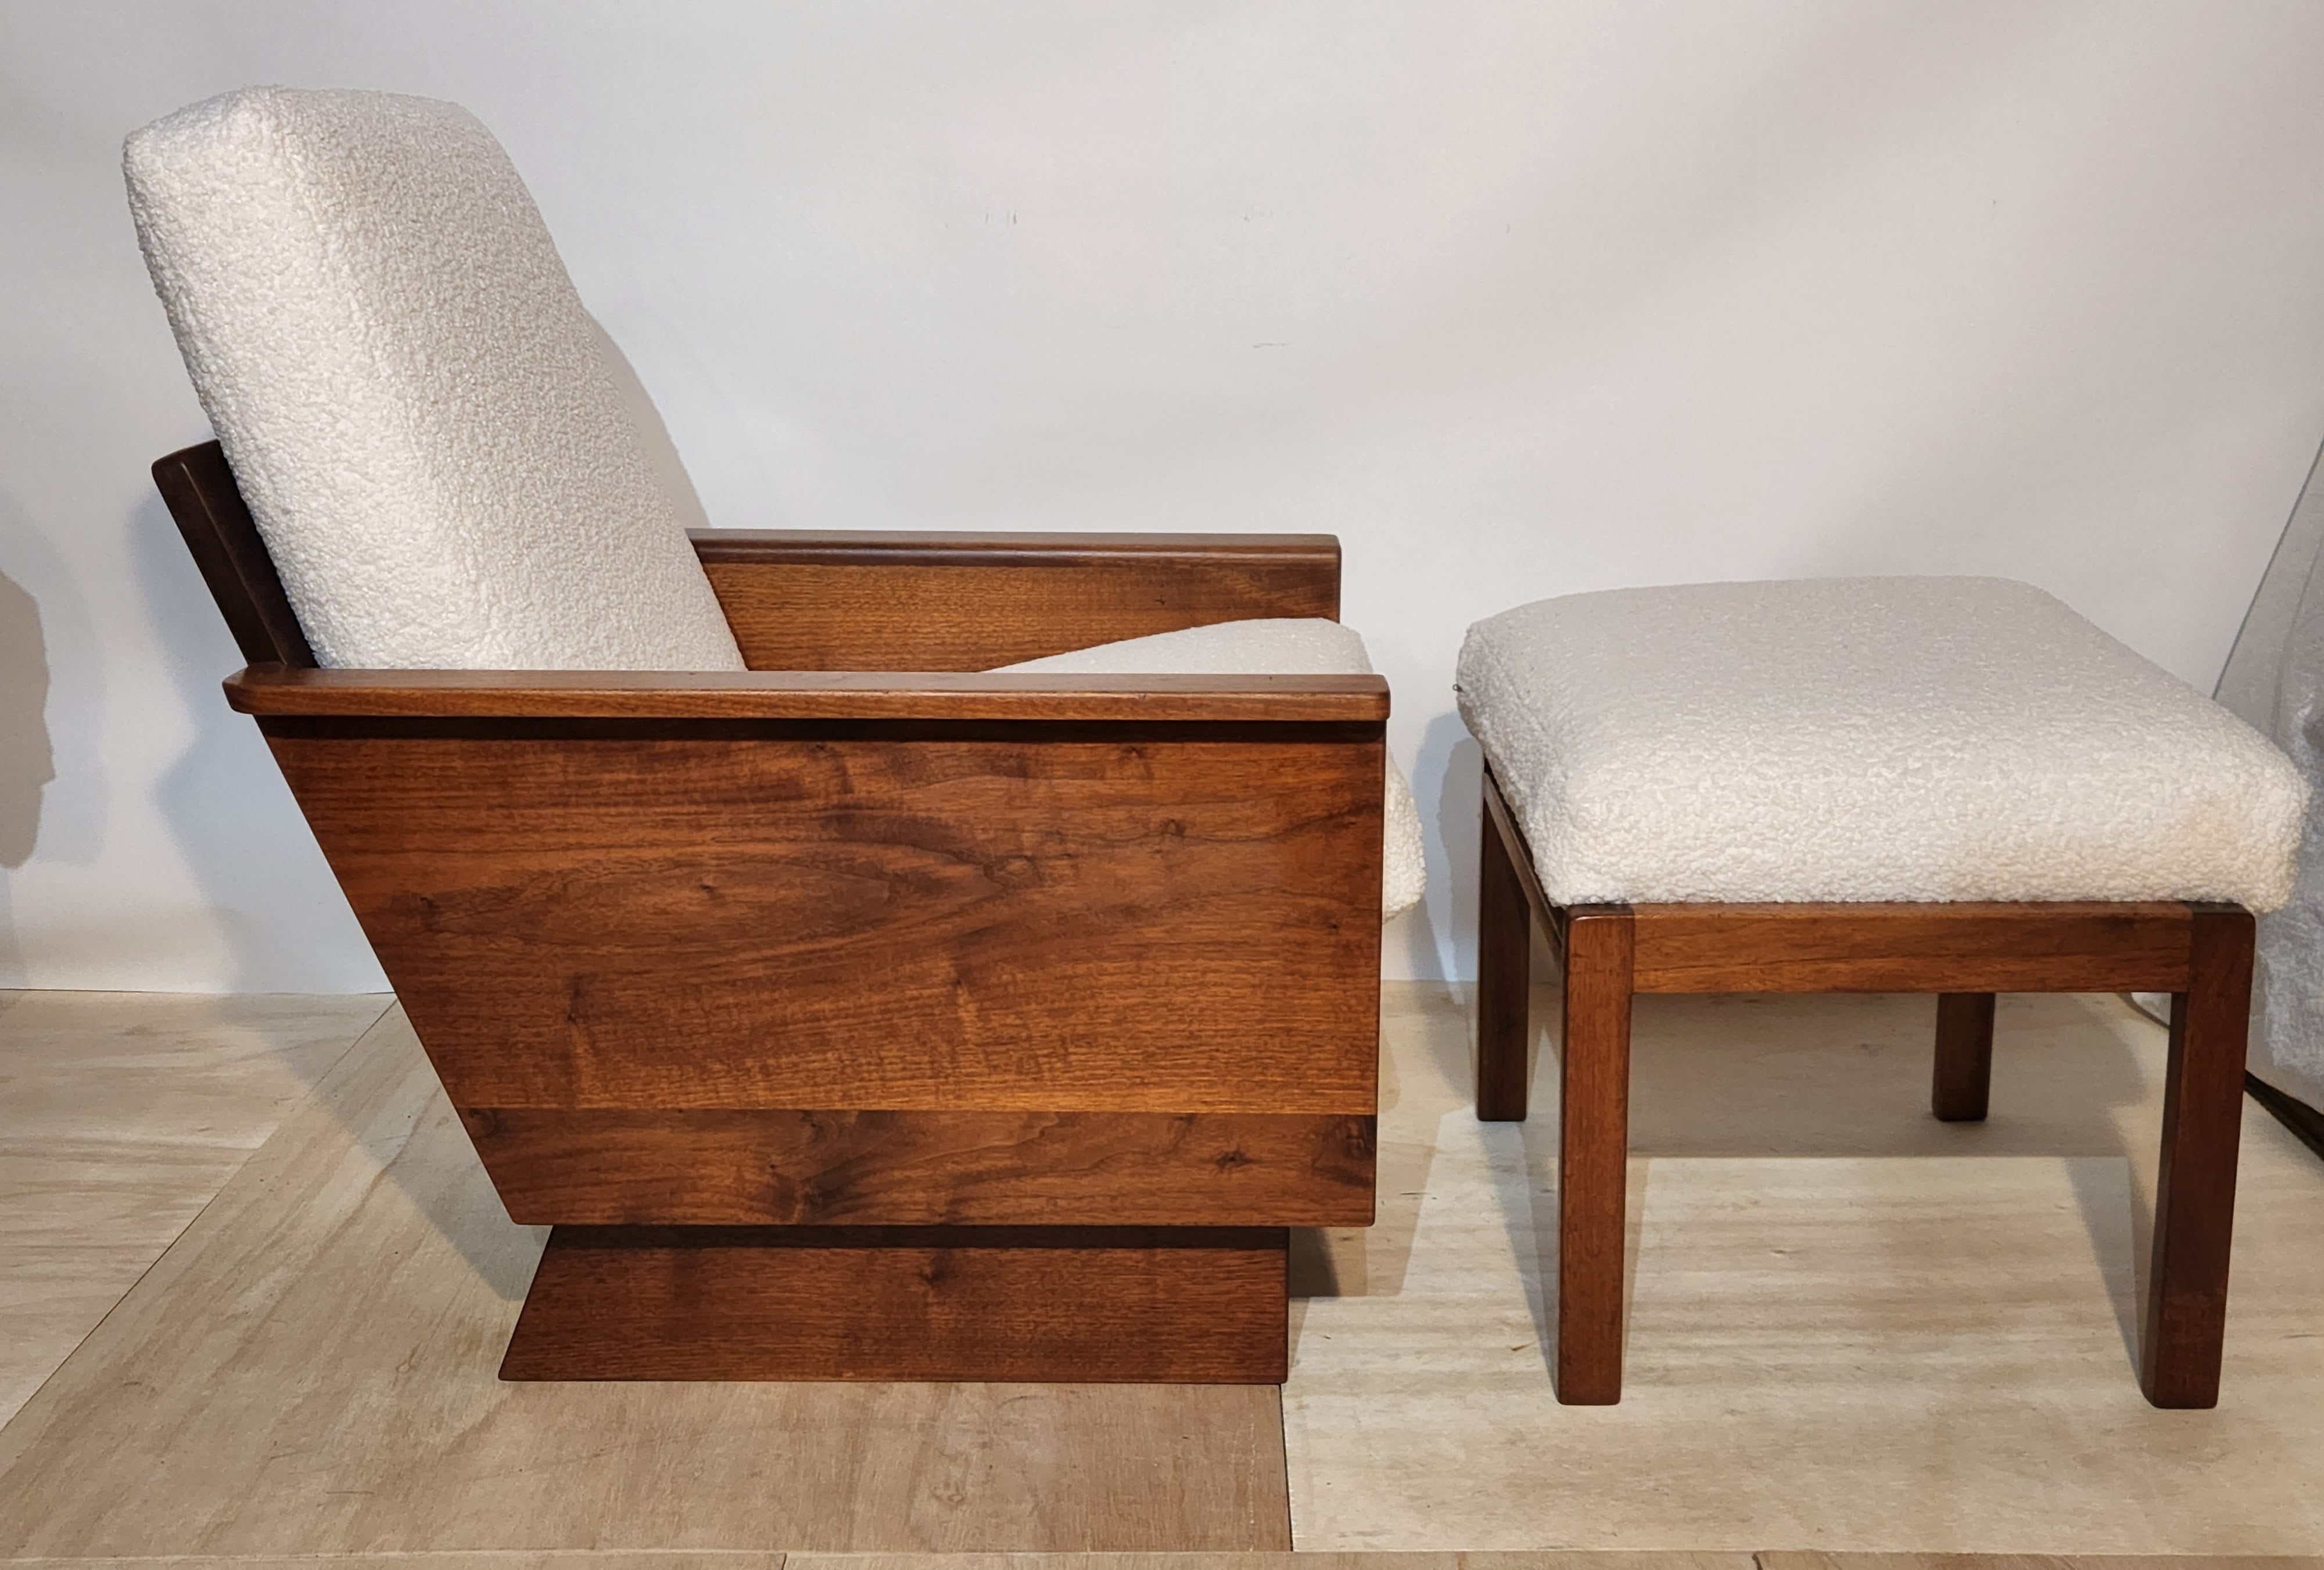 Arden Riddle Lounge Chair and Ottoman Studio Craft, 1979